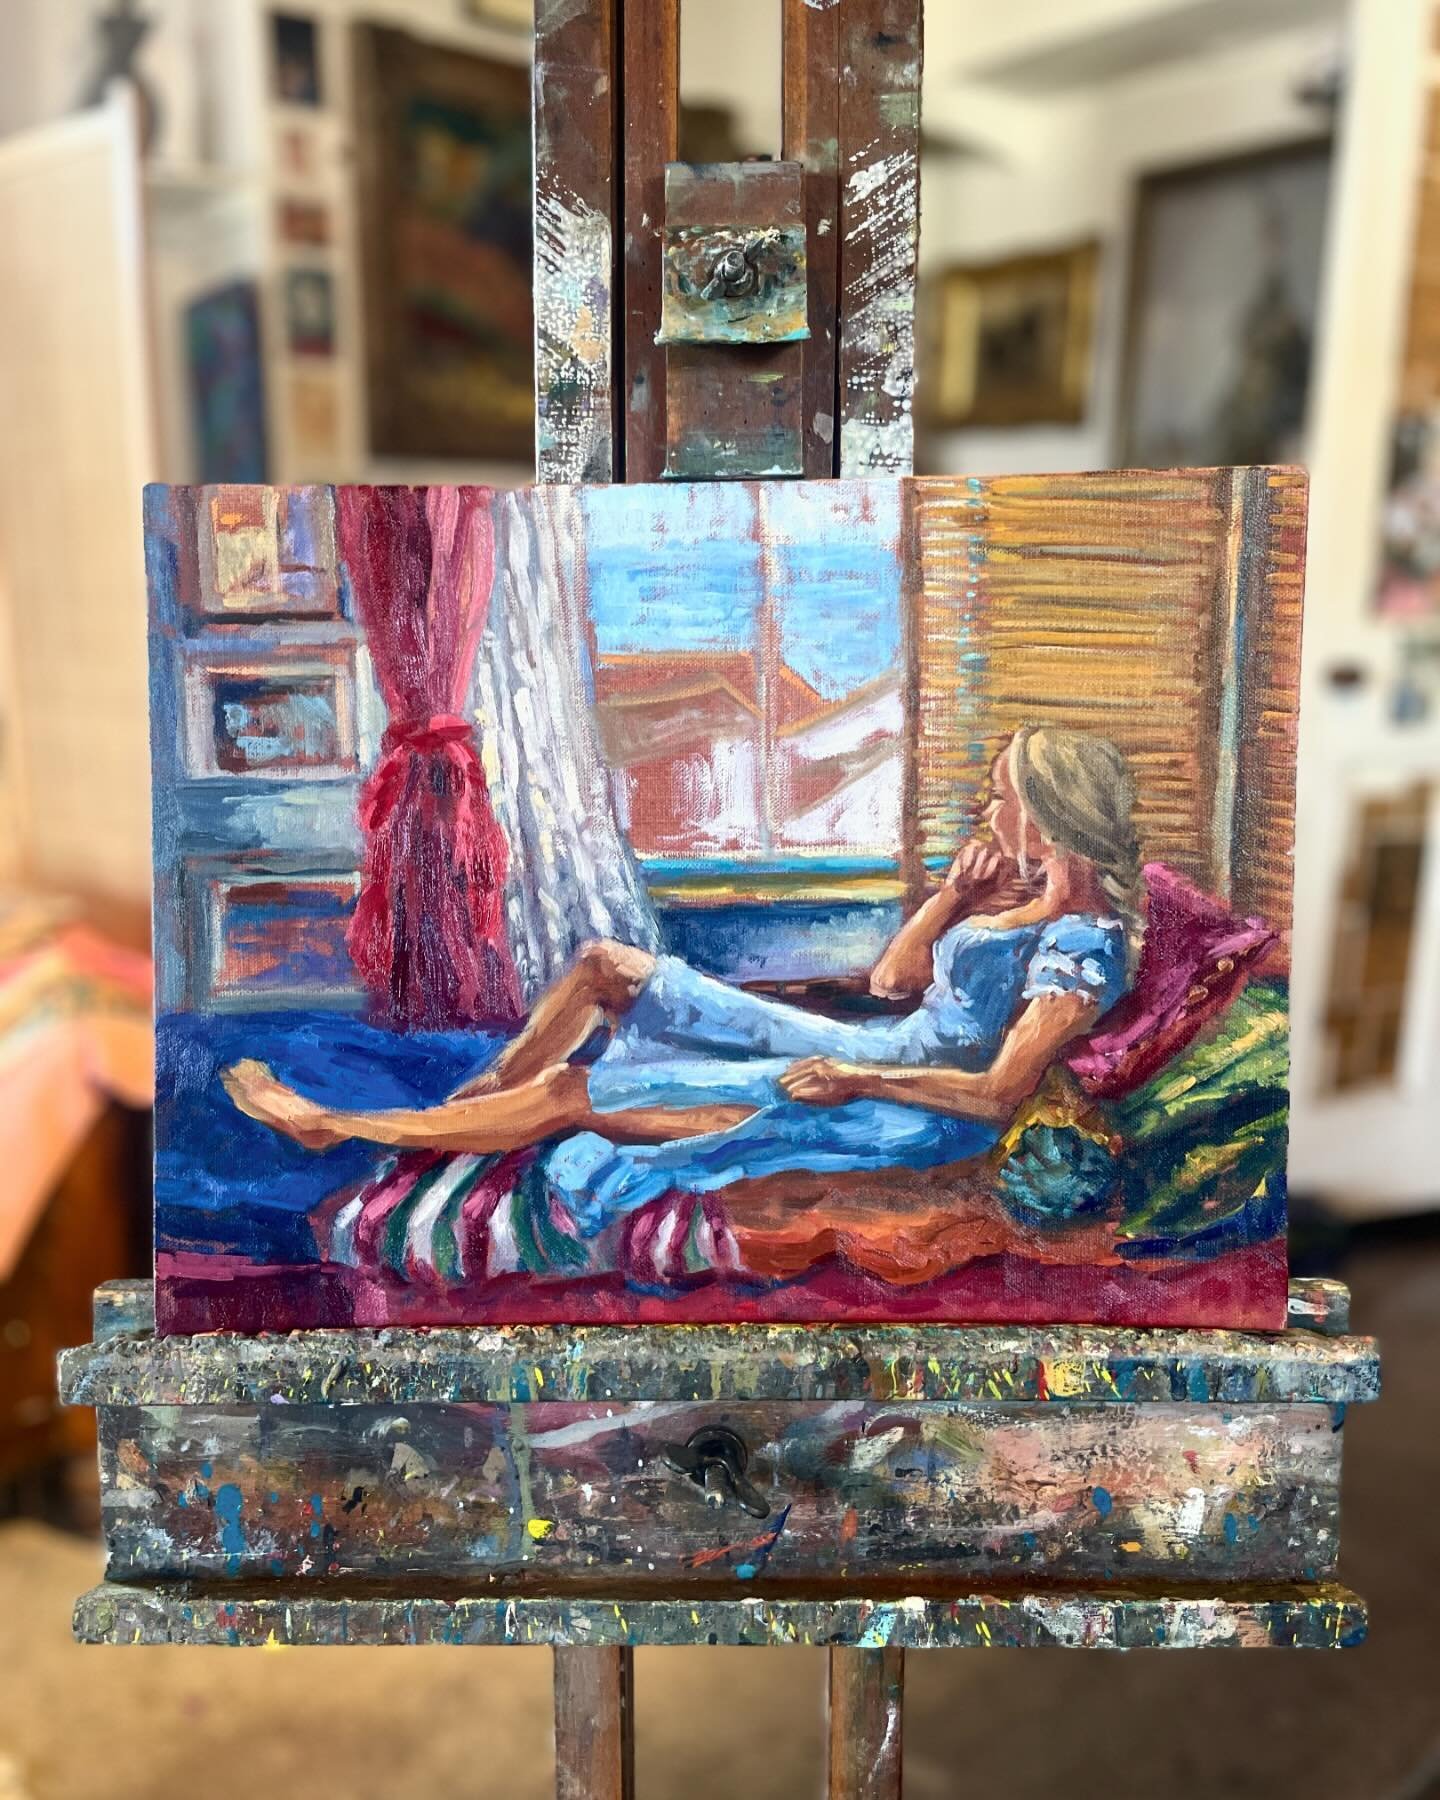 Busy day glazing pieces this morning then working on the background of this one in the afternoon #figurepainting #oilpainting #figurework #figureart #oilpaint #thenewgallery #contemporaryart #artist #figurestudy #fineart #originalart #portscatho